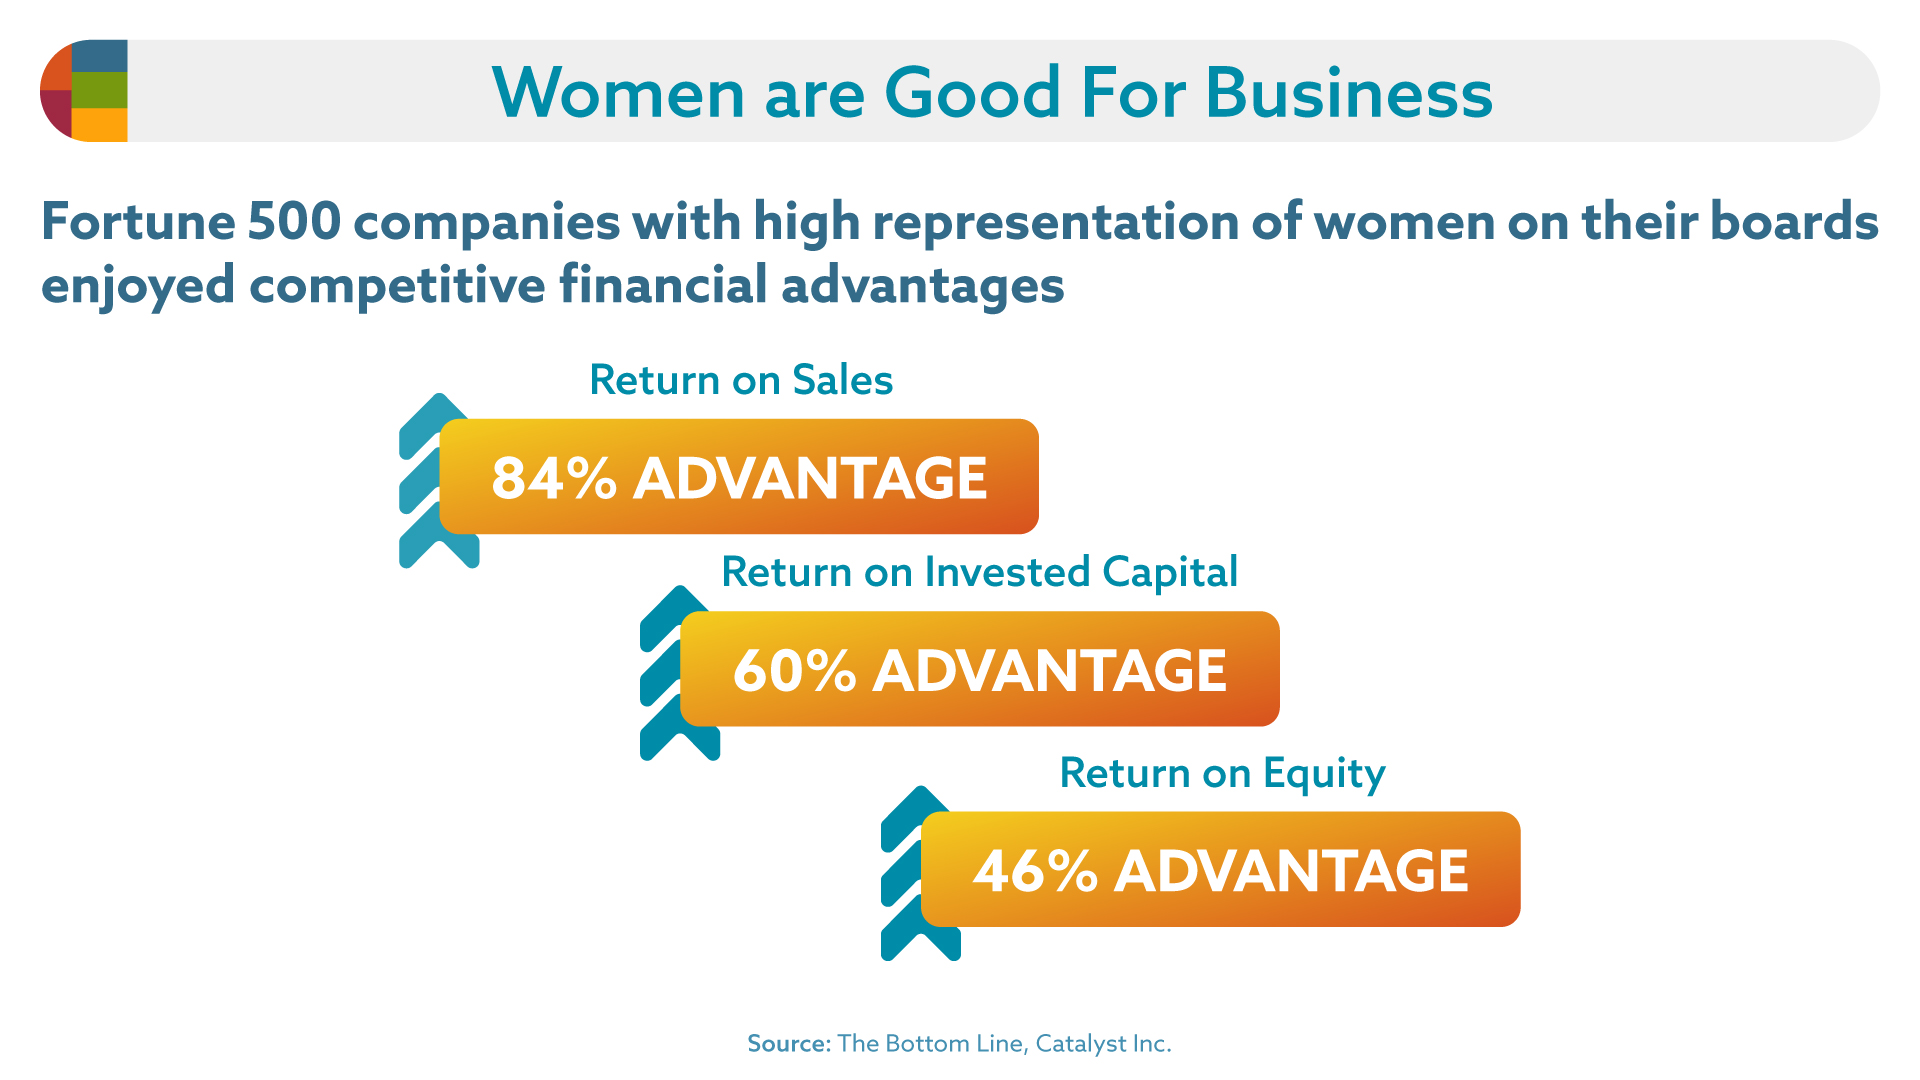 Women are good for business